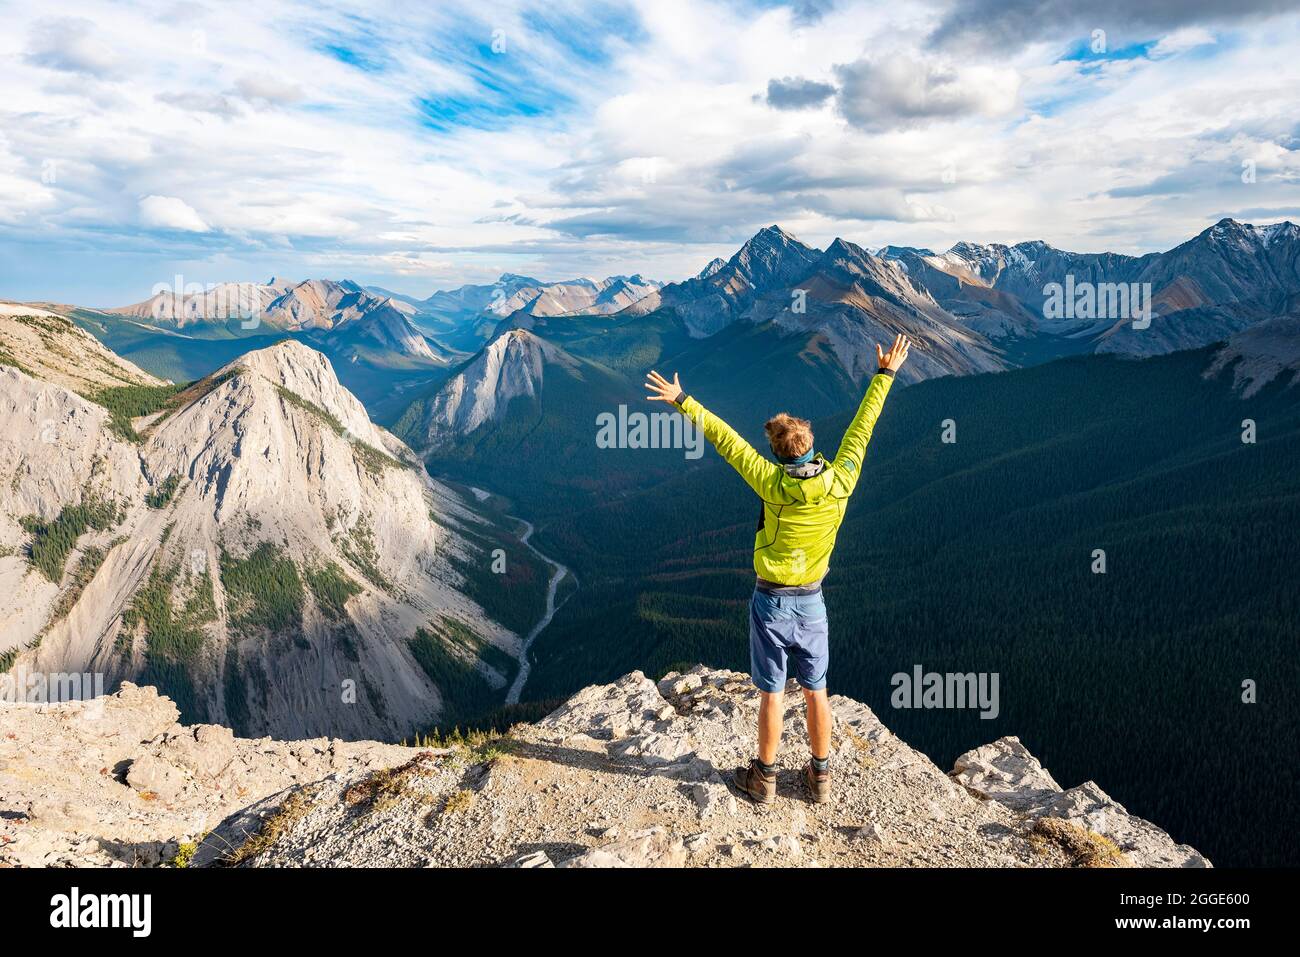 Hiker stretches his arms in the air, mountain landscape with river valley and peaks, peaks with orange sulphur deposits, Overturn Mountain, panoramic Stock Photo